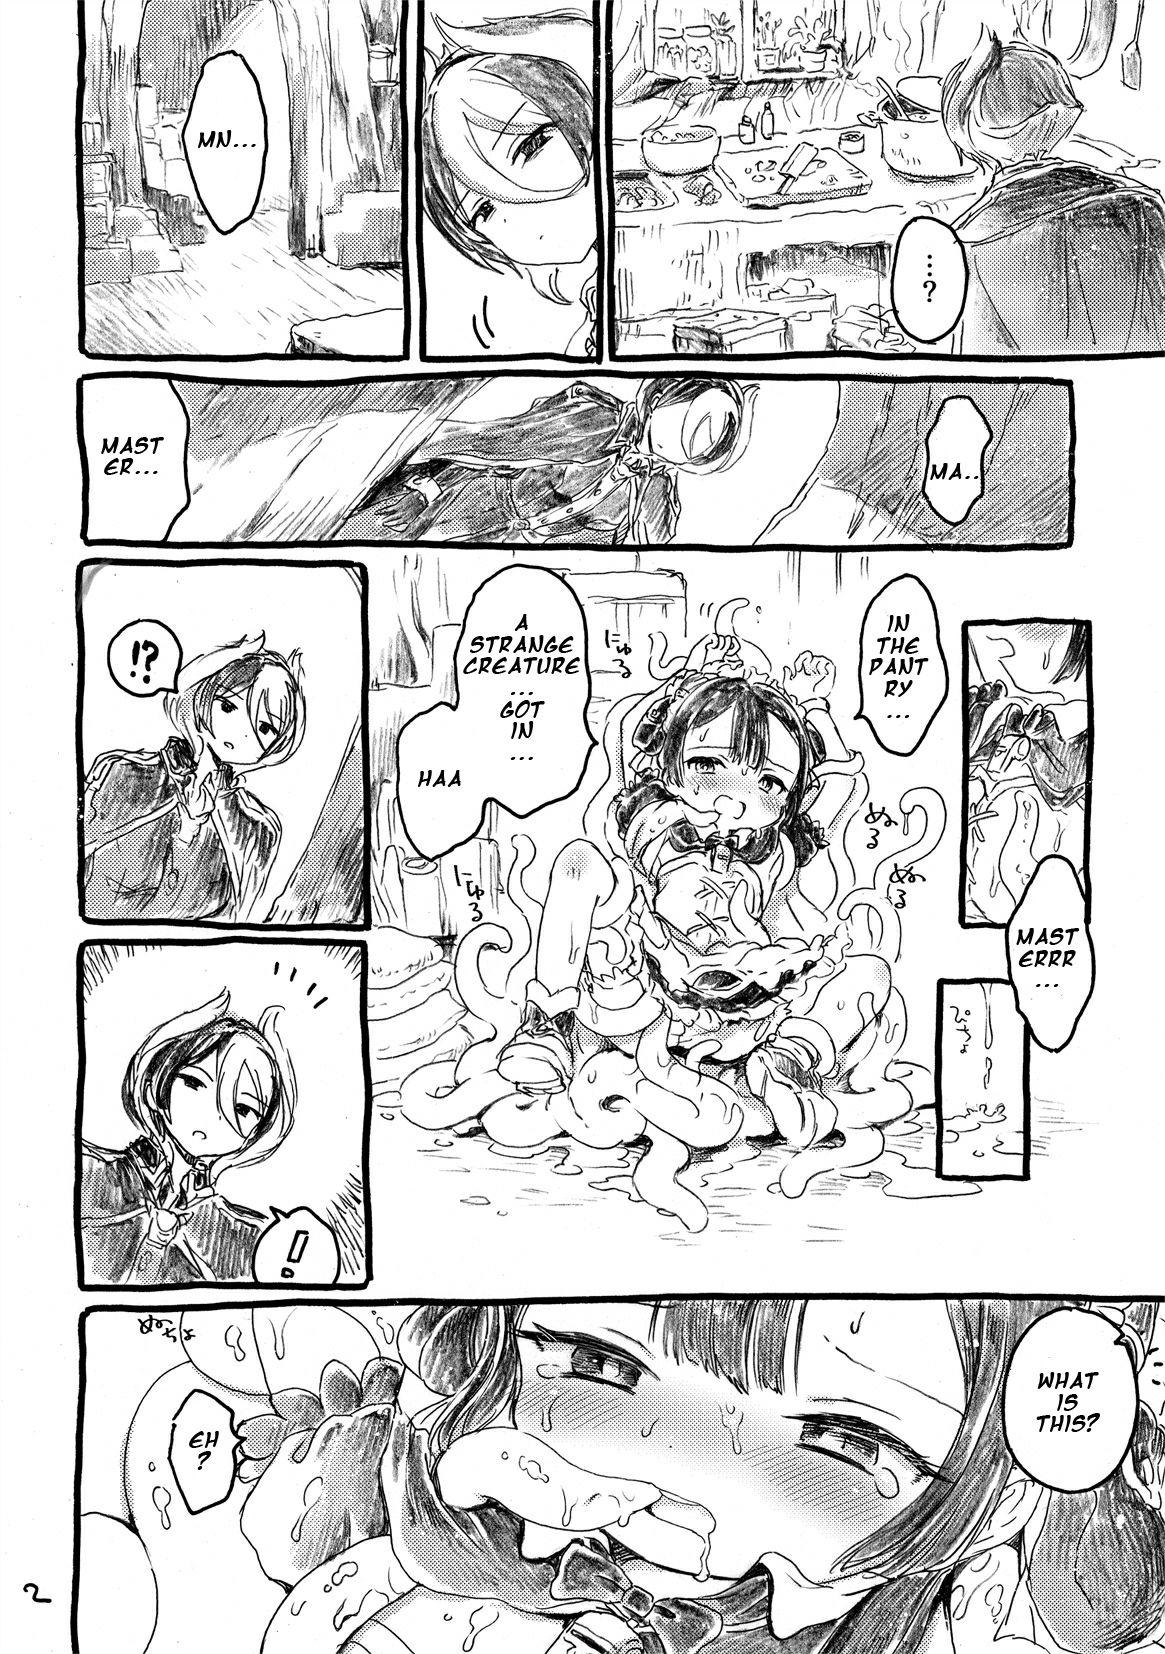 Arabe Fudou Kyou to Marulk no Abyss - Made in abyss Shemales - Page 2